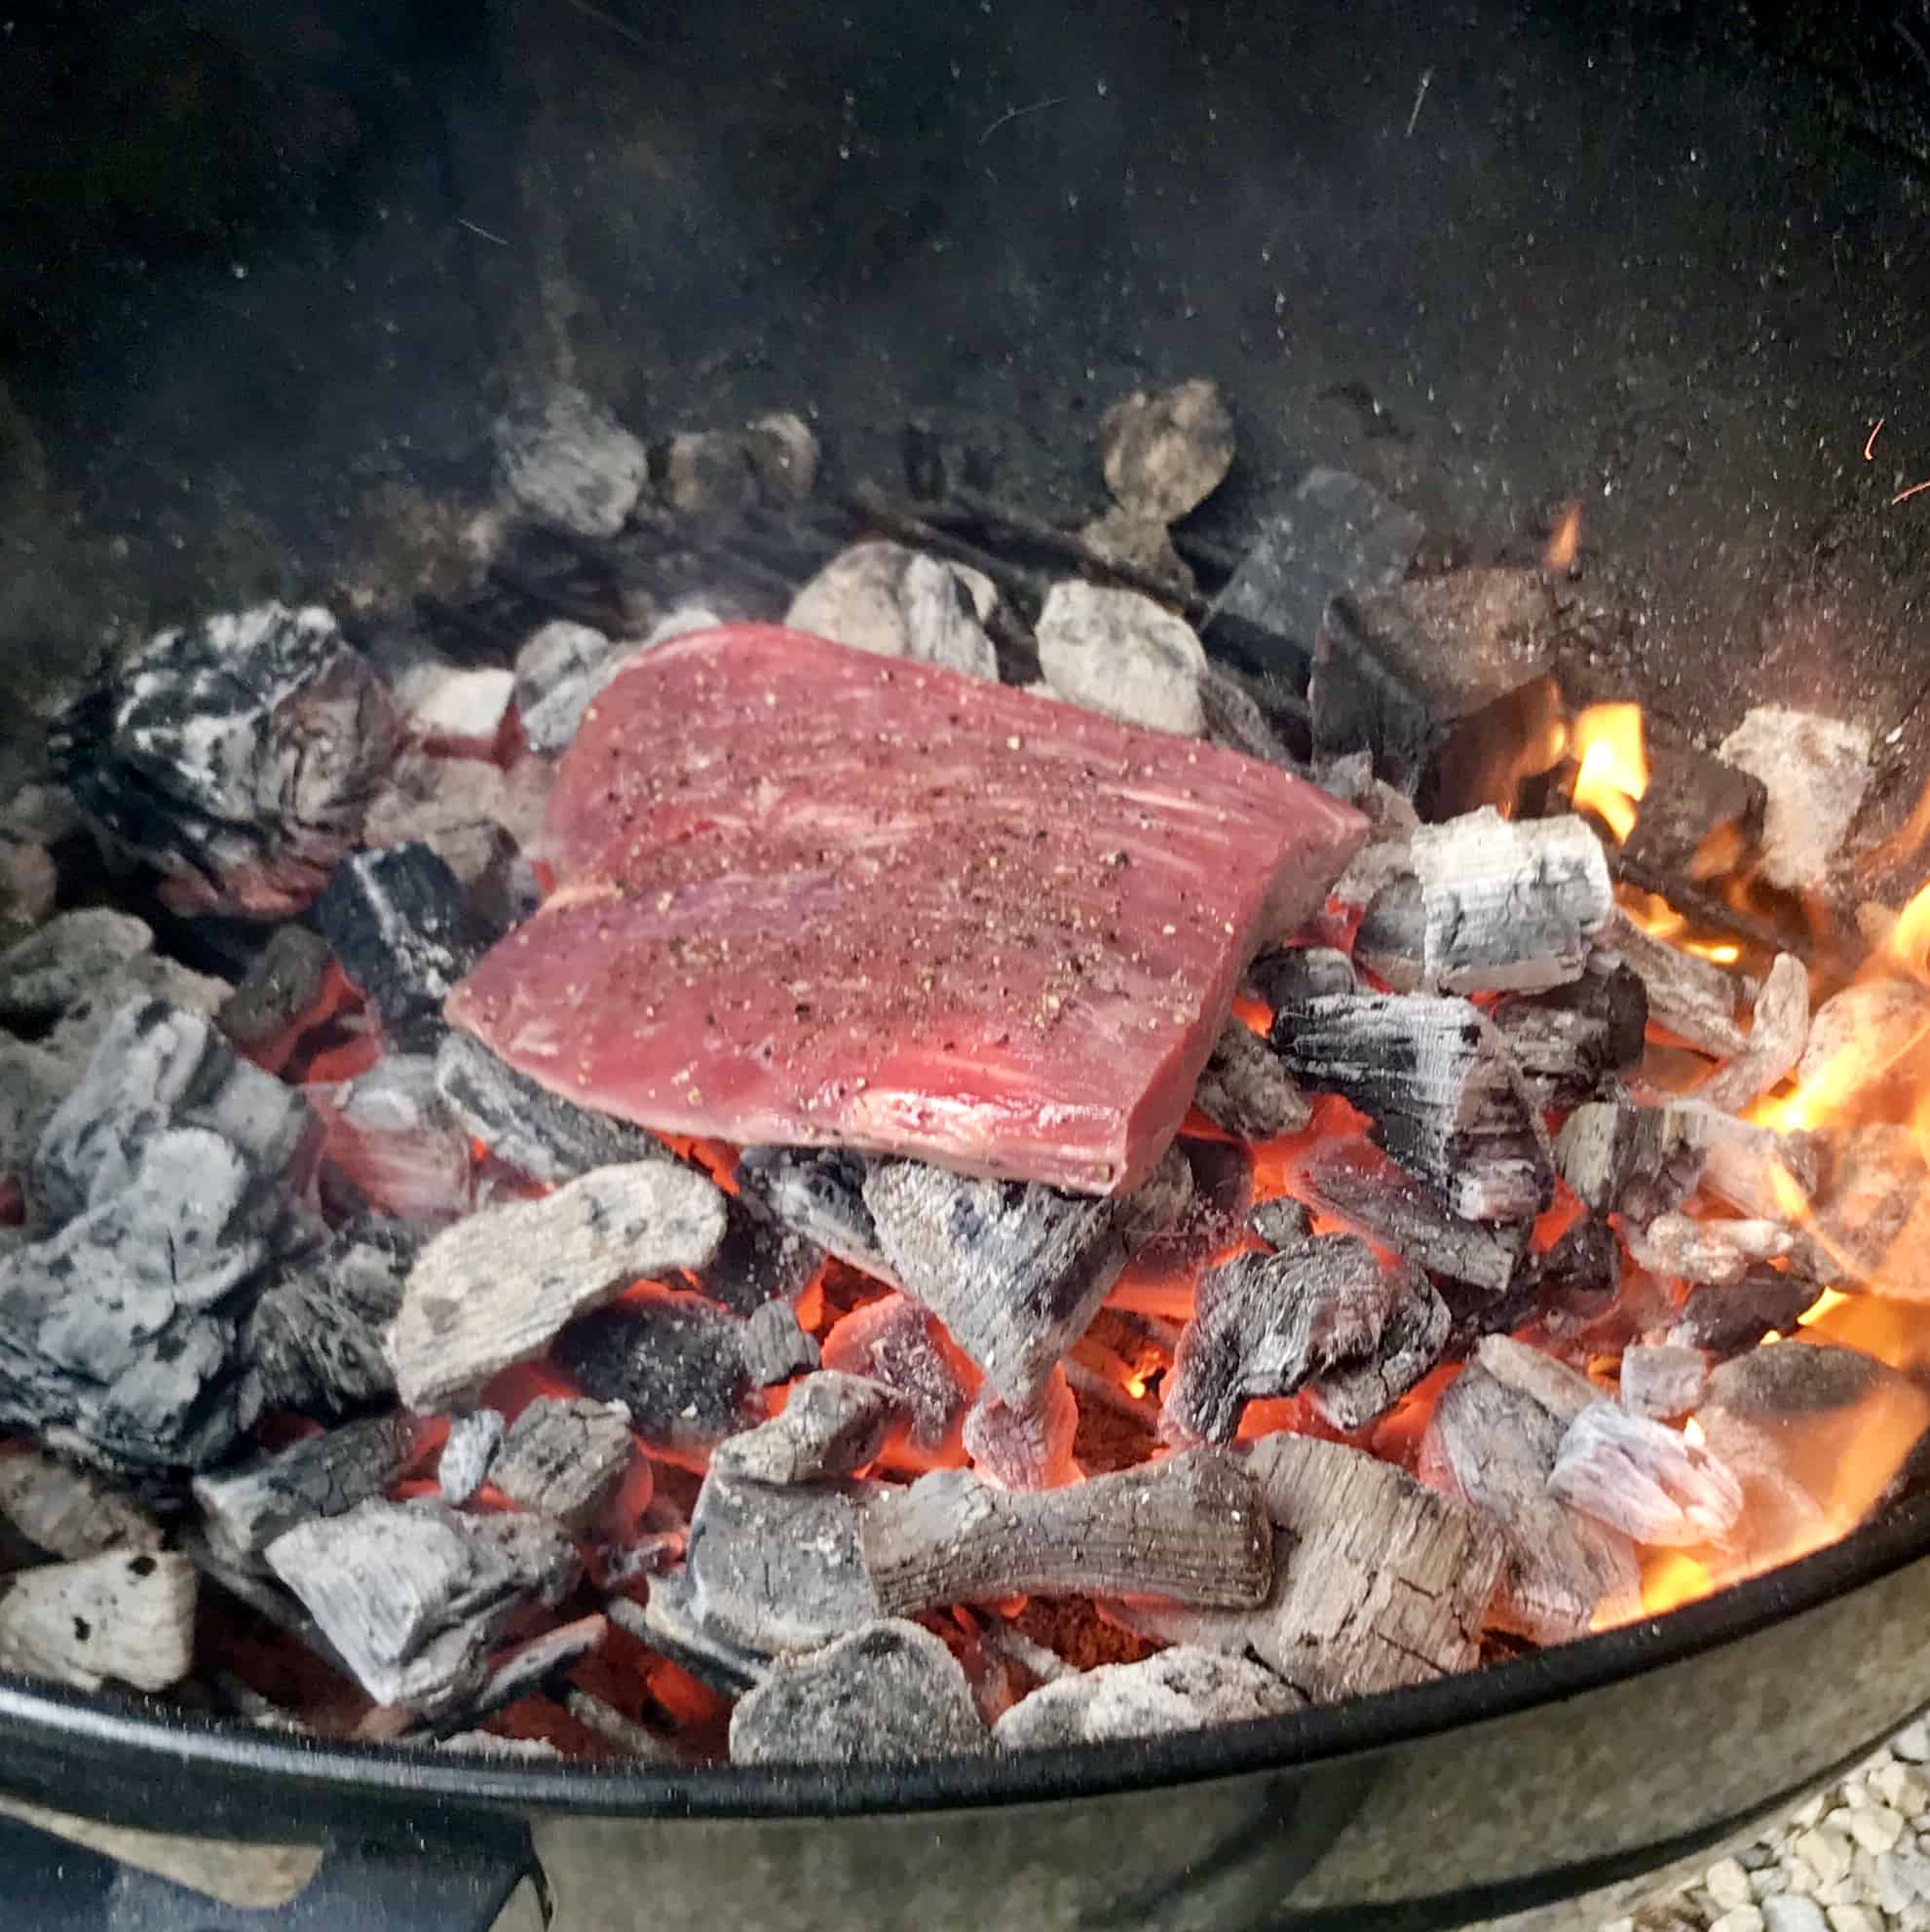 Raw steak being cooked directly on hot coals close up view